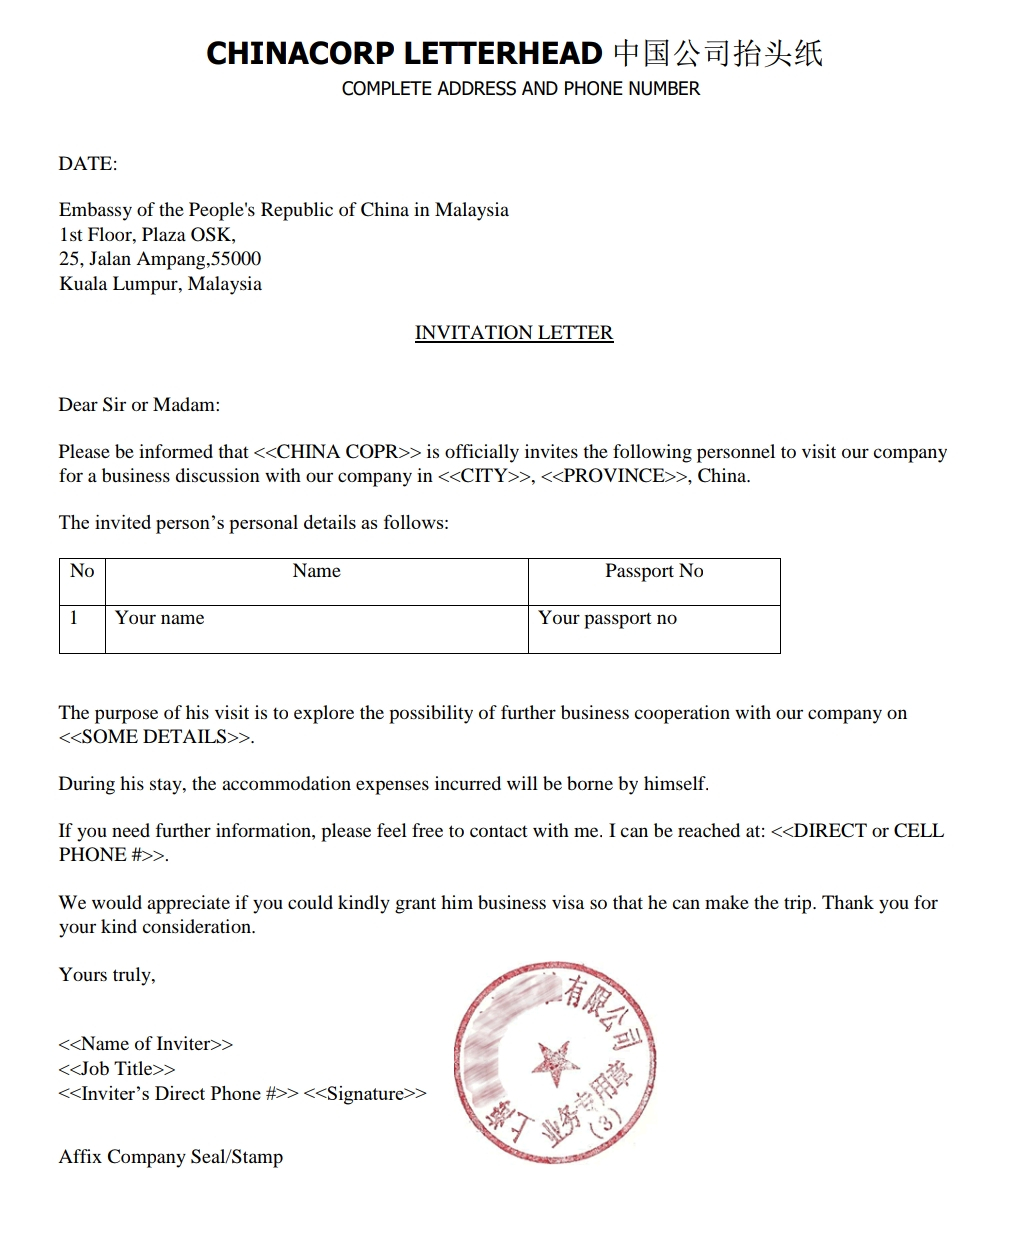 China Visa Sample Invitation Letter For Business Visa Tripvisamy with regard to dimensions 1022 X 1258